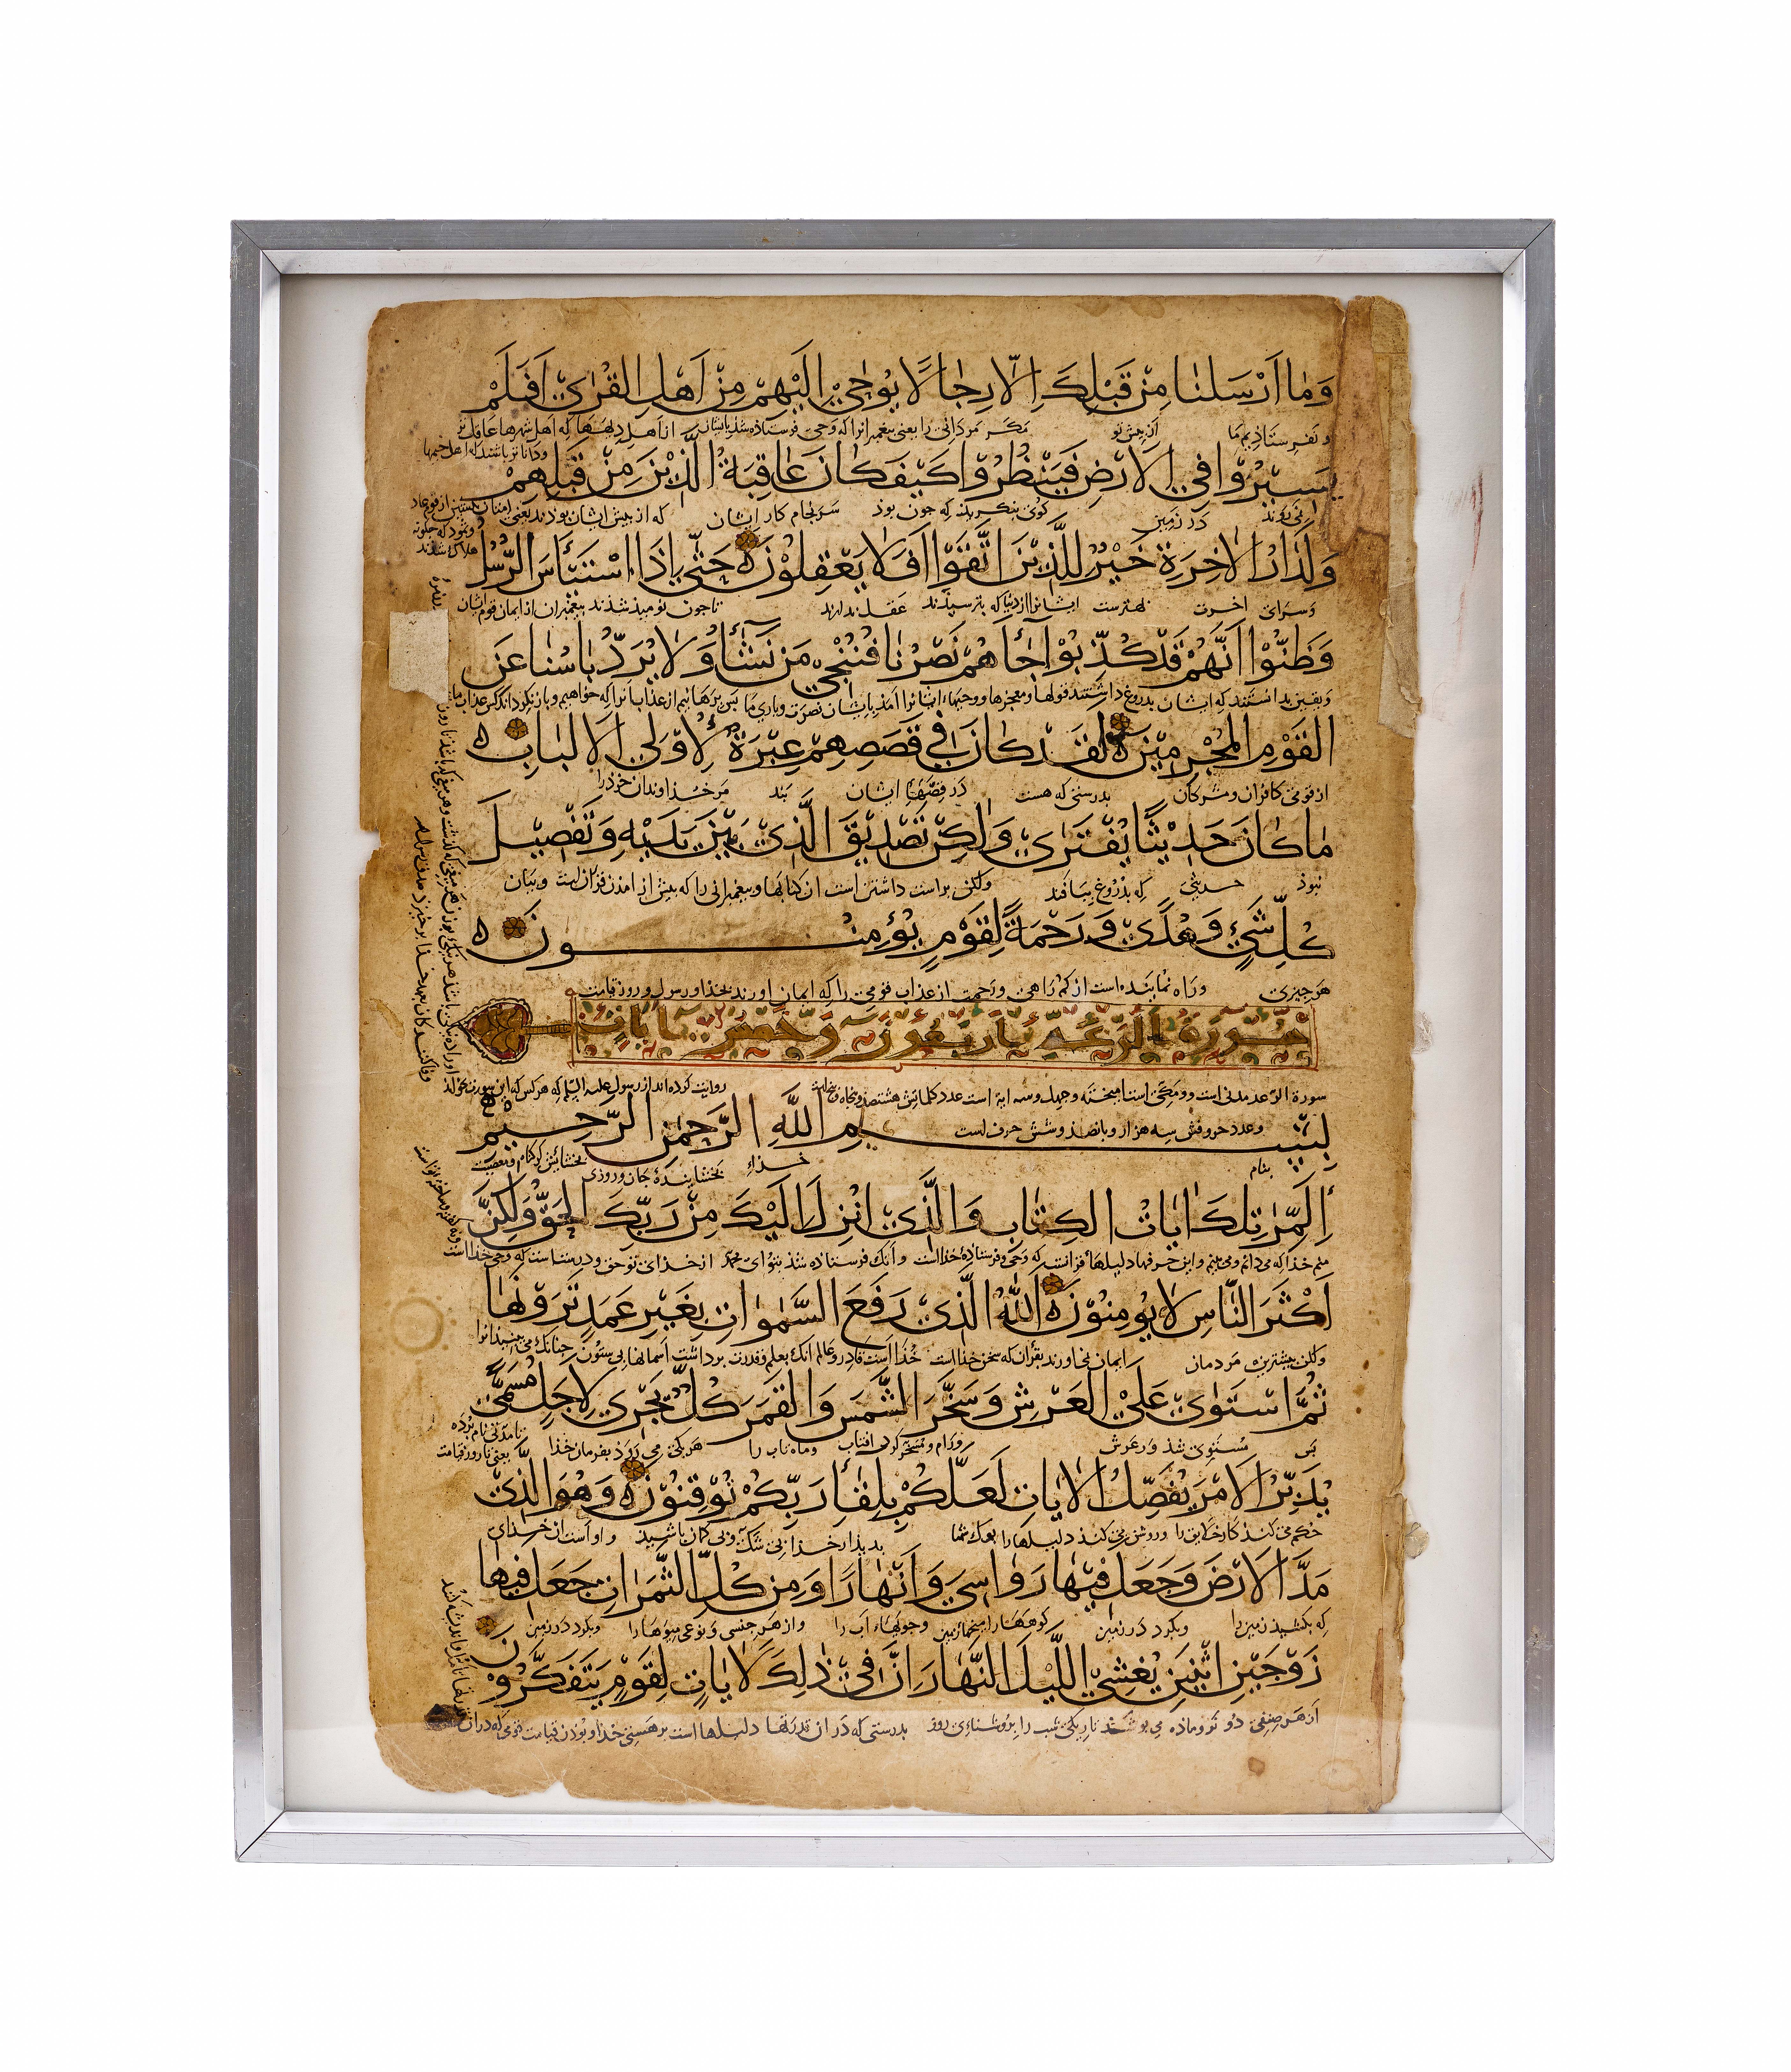 A LARGE ILLUMINATED QURAN LEAF, CENTRAL ASIA, PROBABLY MAMLUK, 14TH CENTURY